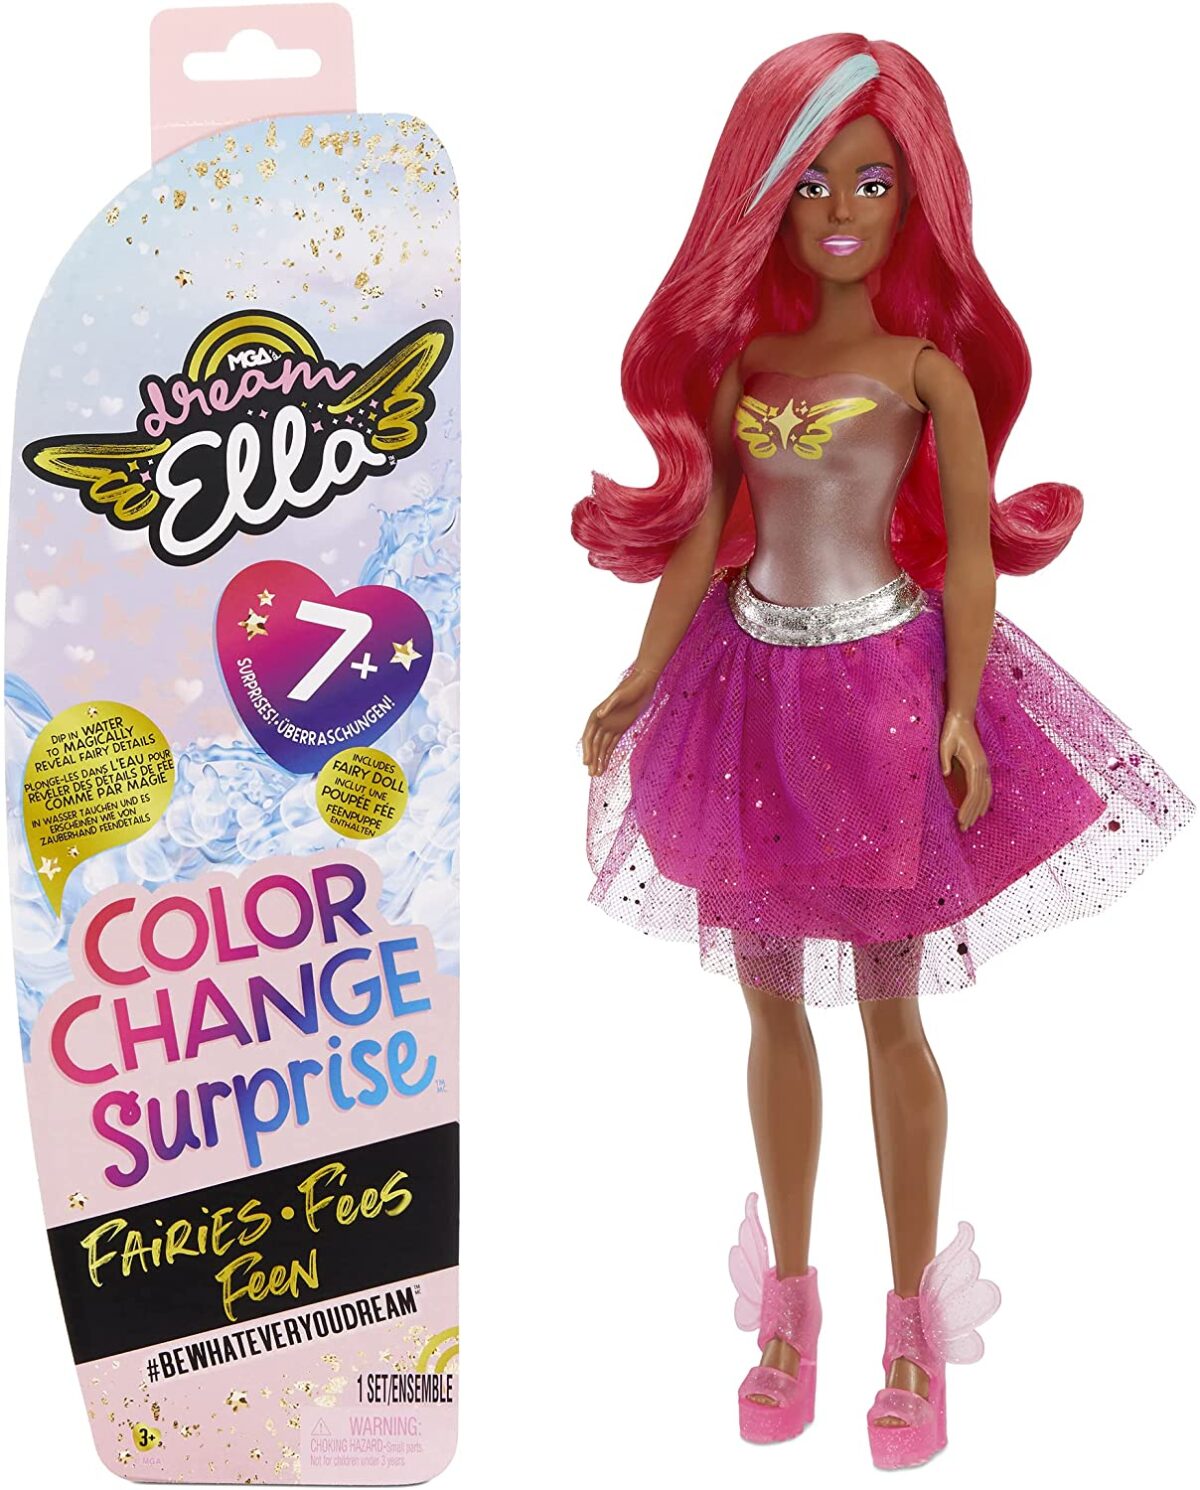 Introducing the newest craze to hit your child’s bedroom, MGA Dream Ella Color Change Surprise Fairies dolls. 